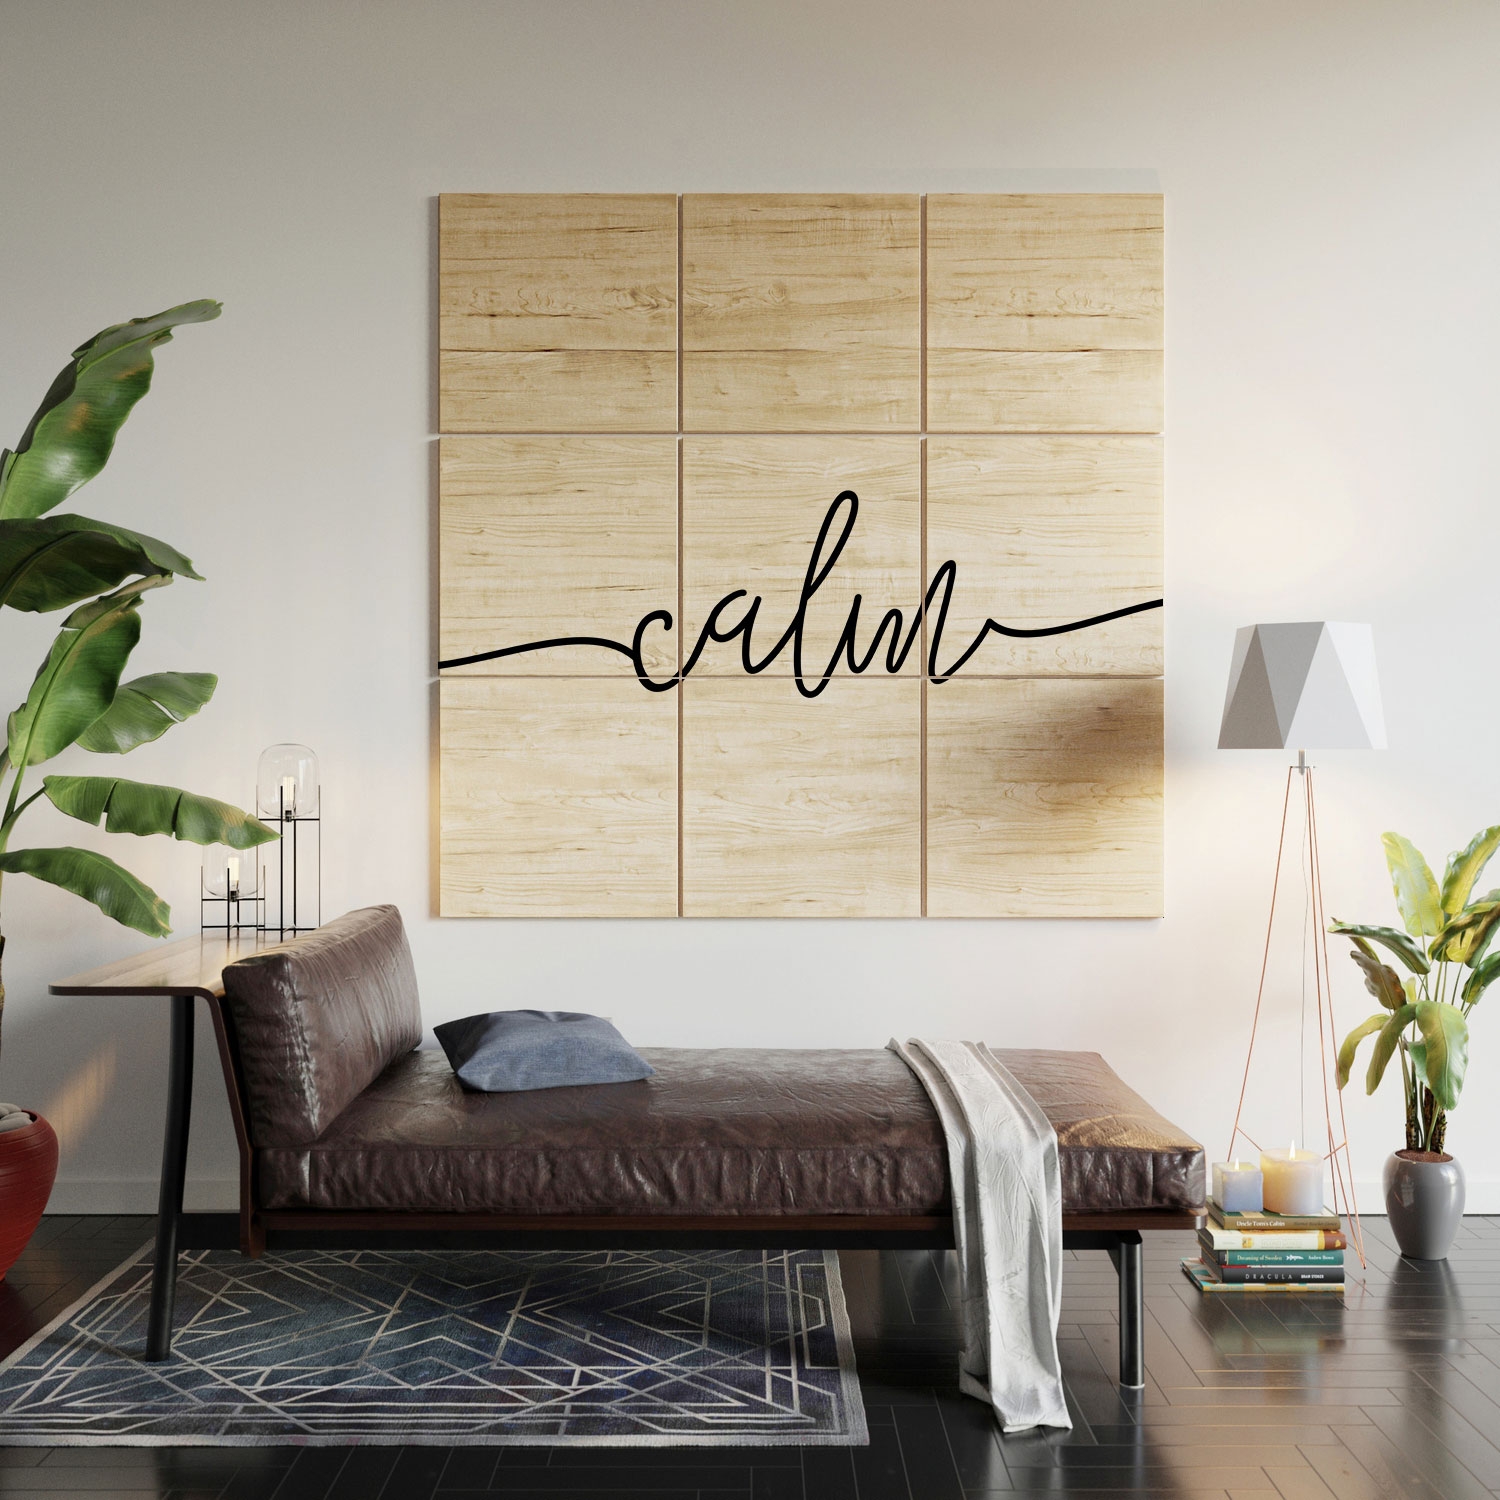 Calm Typo by Sisi and Seb - Wood Wall Mural4' x 4' (Nine 16" Wood Squares) - Image 4